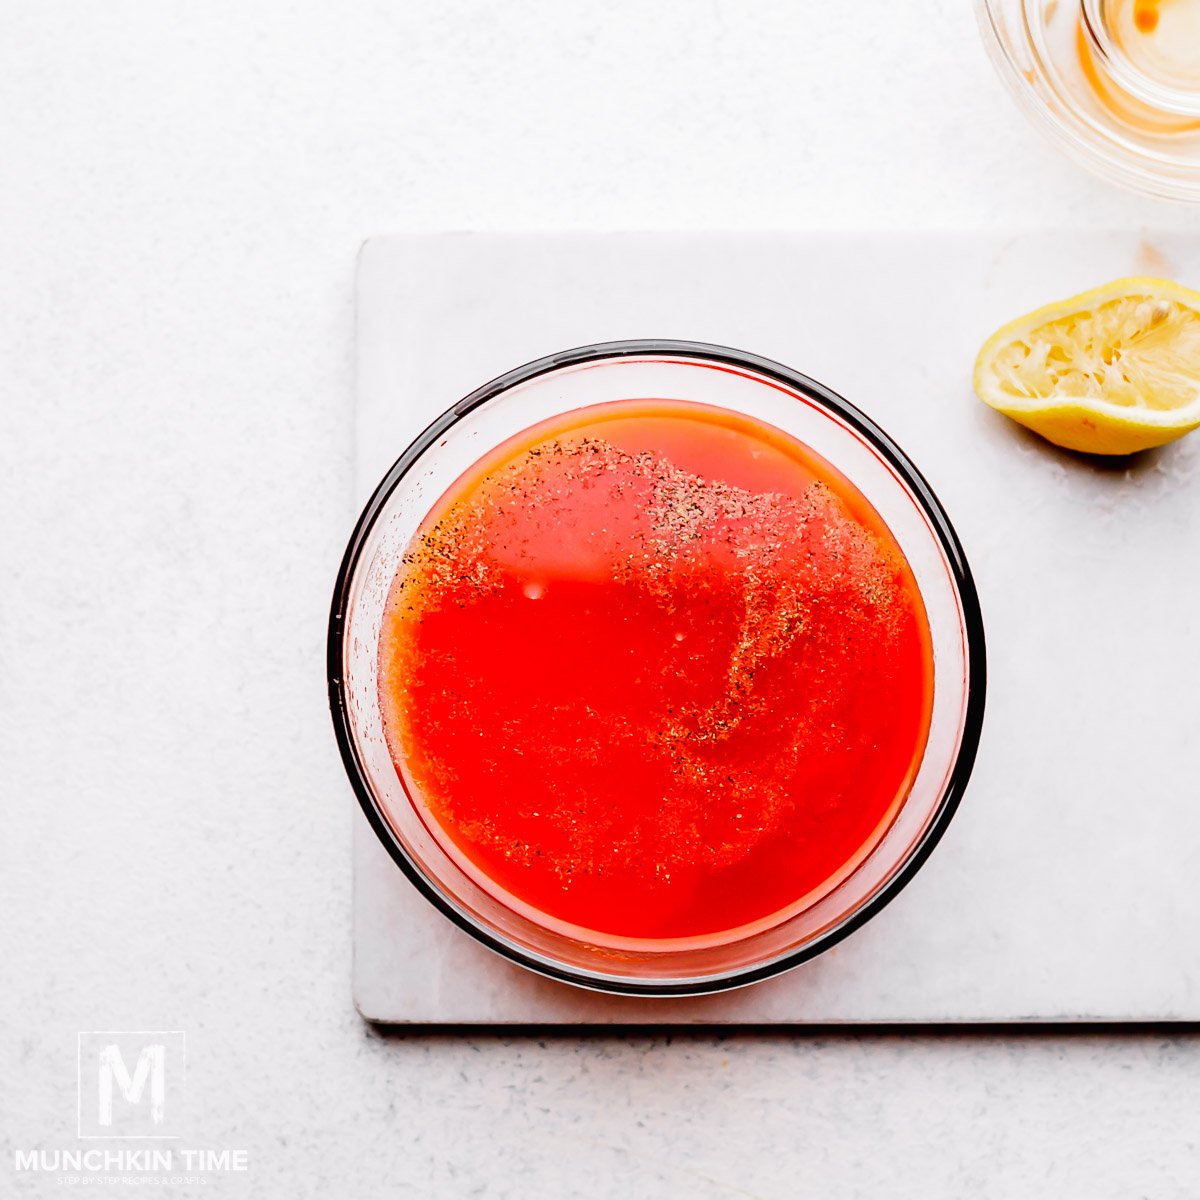 How to make homemade Clamato juice with tomato and clam juice.